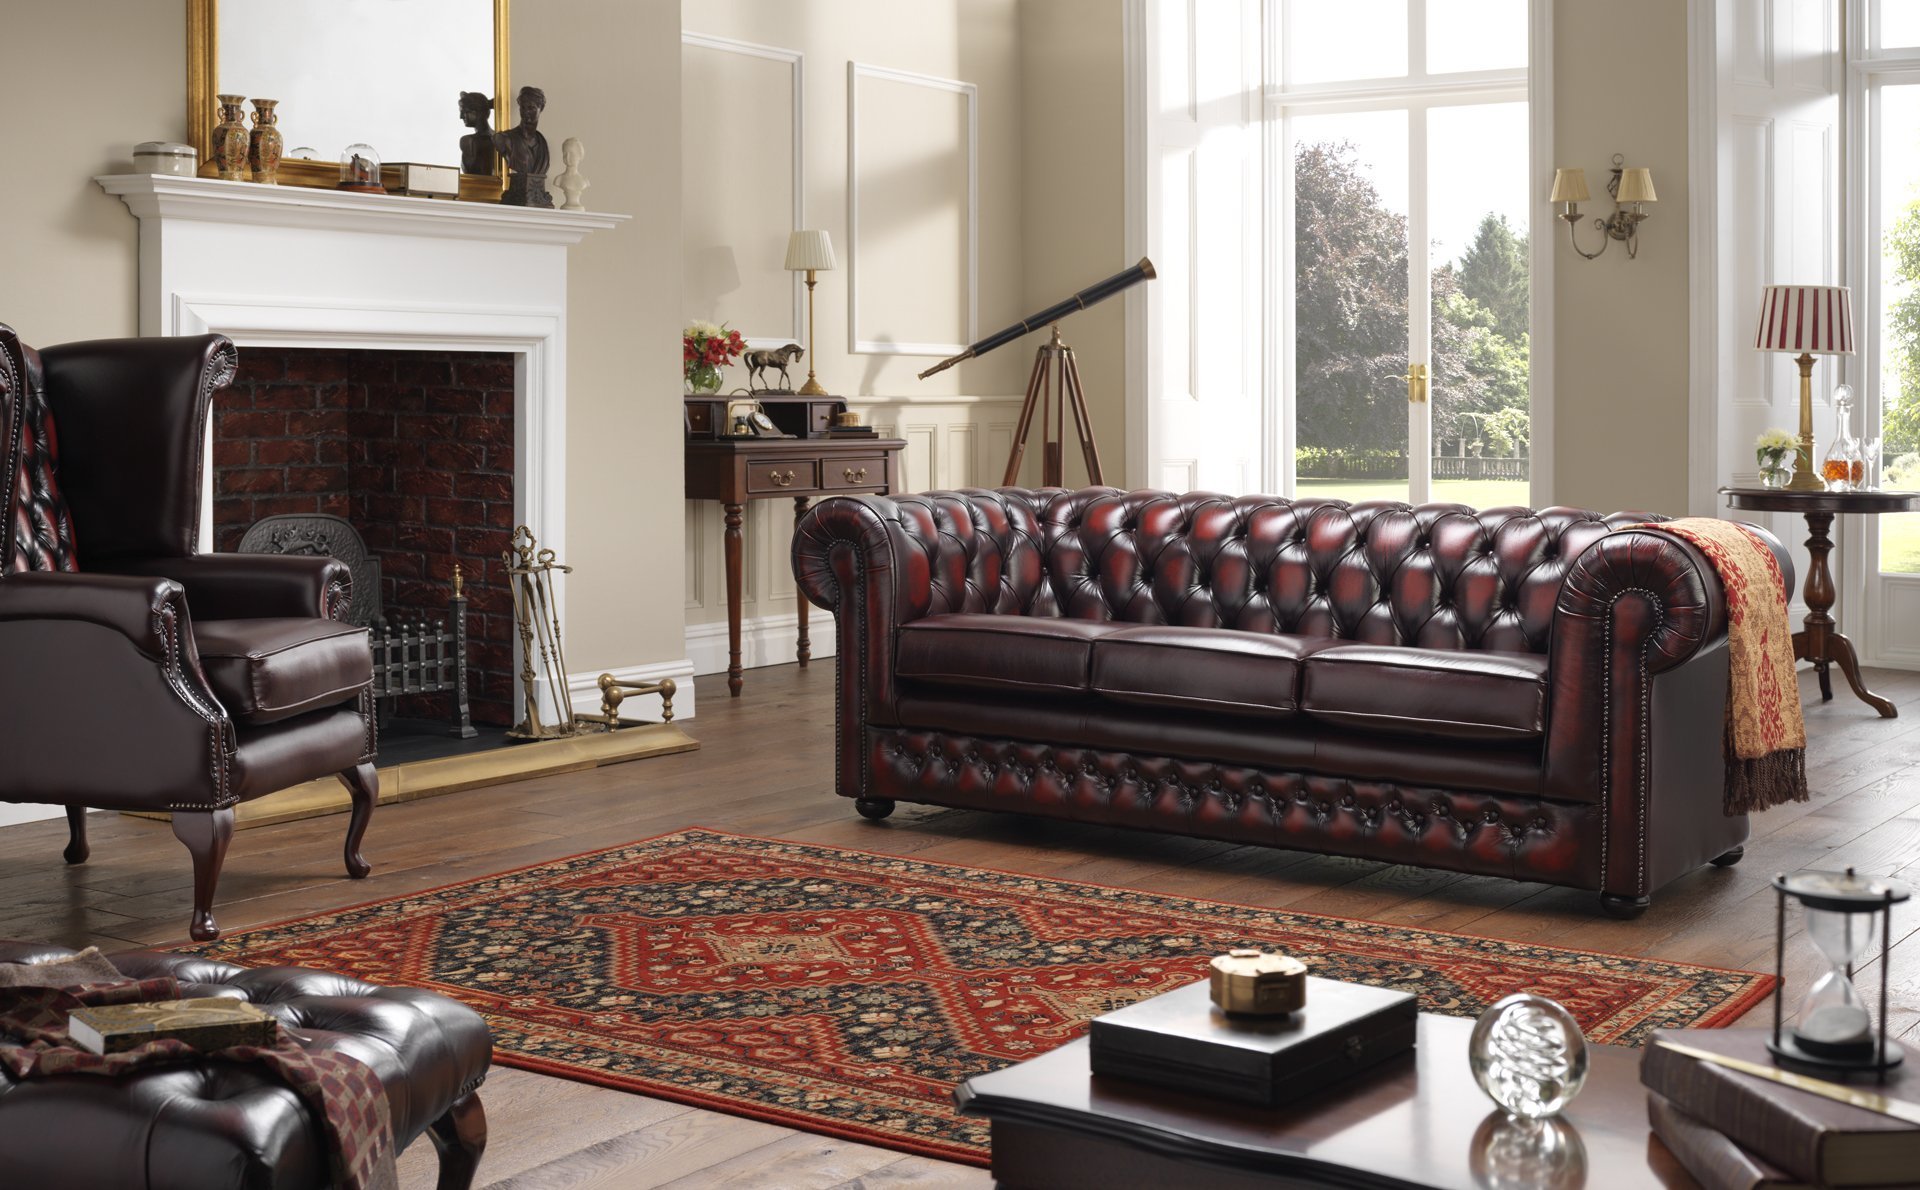 Chesterfield 3 Seater Leather Sofa in a traditional living ...